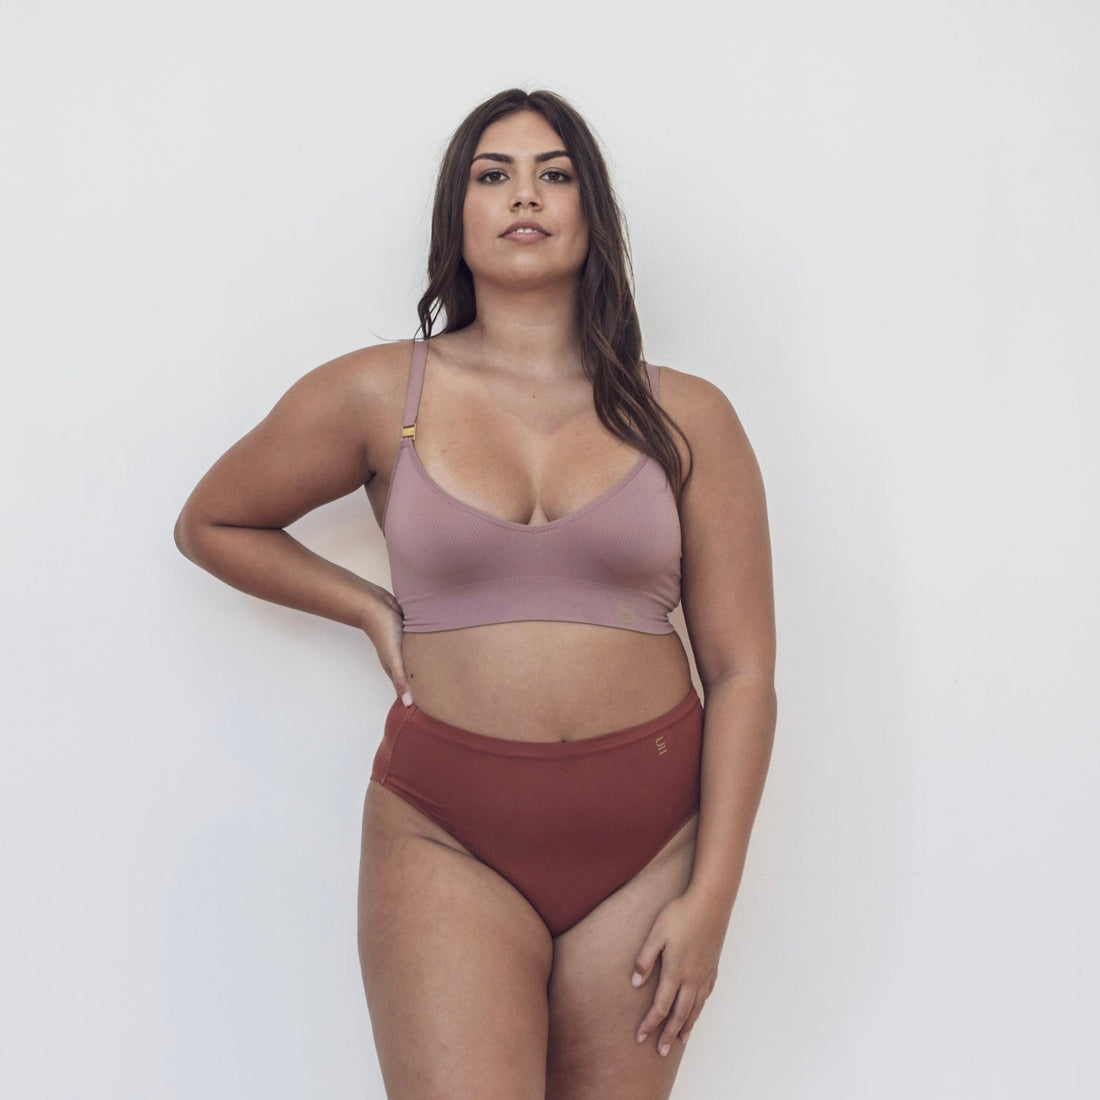 Sustainable clay high waist brief by Underwear for Humanity: ethical, sustainable. sizes 6-26. light, breathable. Models wear high-waisted underwear. underwear sits high on the waist, full seat coverage. smooth under clothing. made from Tencel and recycled materials